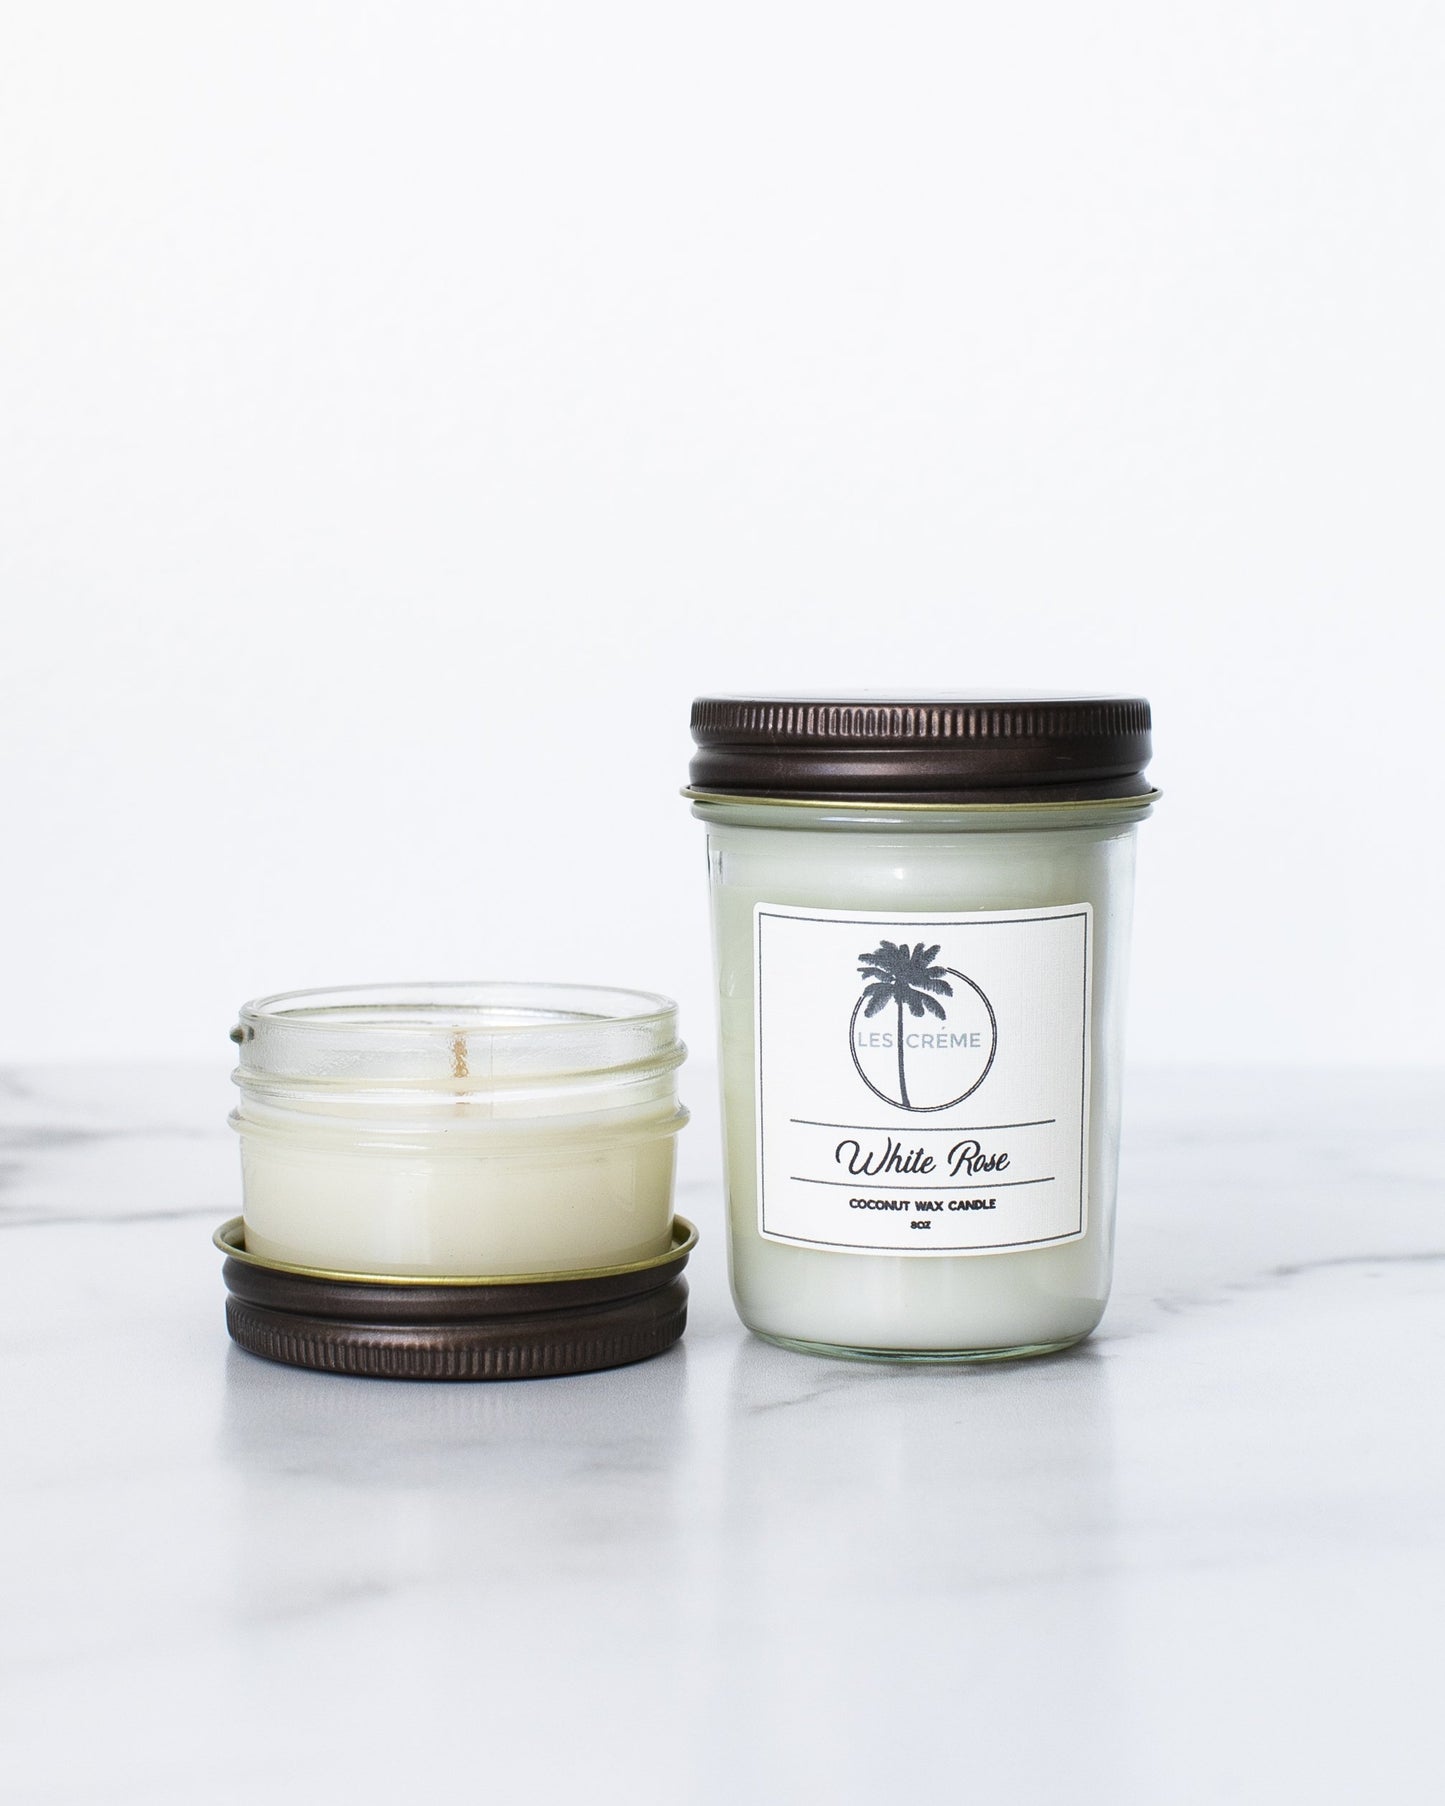 White Rose Scent Coconut Wax Candle - BagLunchproduct,corp